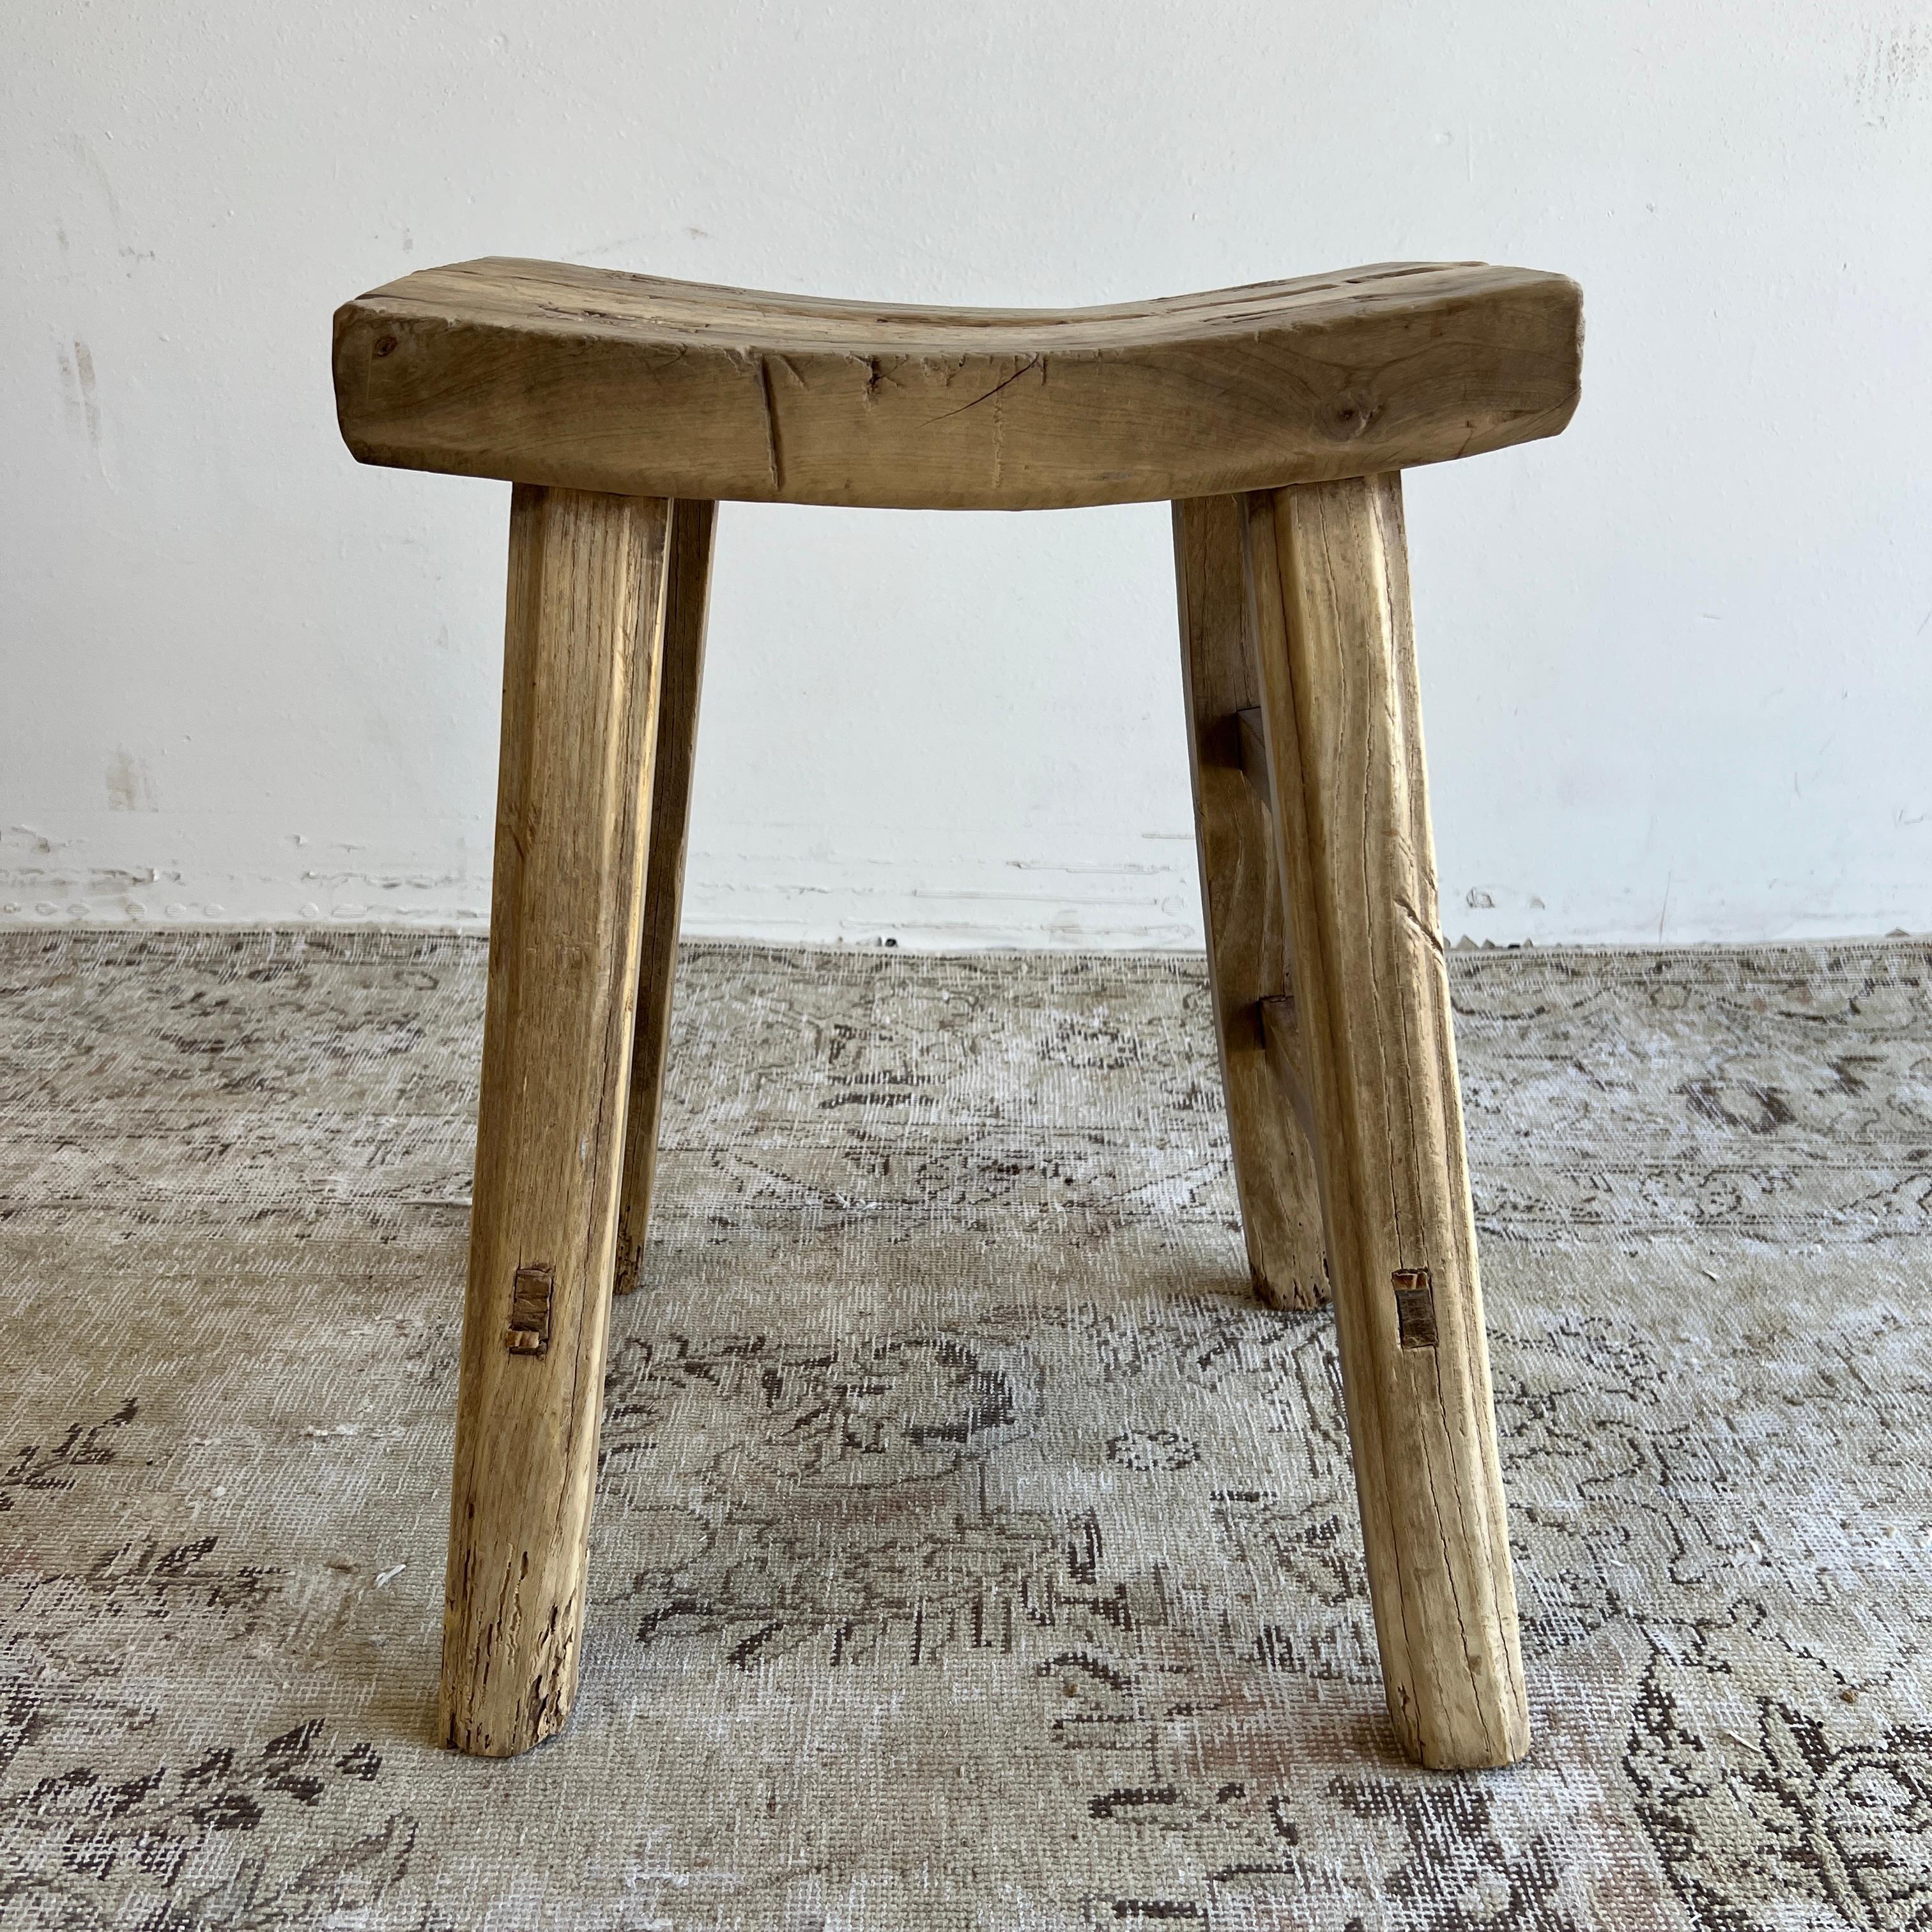 These are the real vintage antique elm wood stools! Beautiful antique patina, with weathering and age, these are solid and sturdy ready for daily use, use as a table, stool, drink table, they are great for any space.
Size: 17